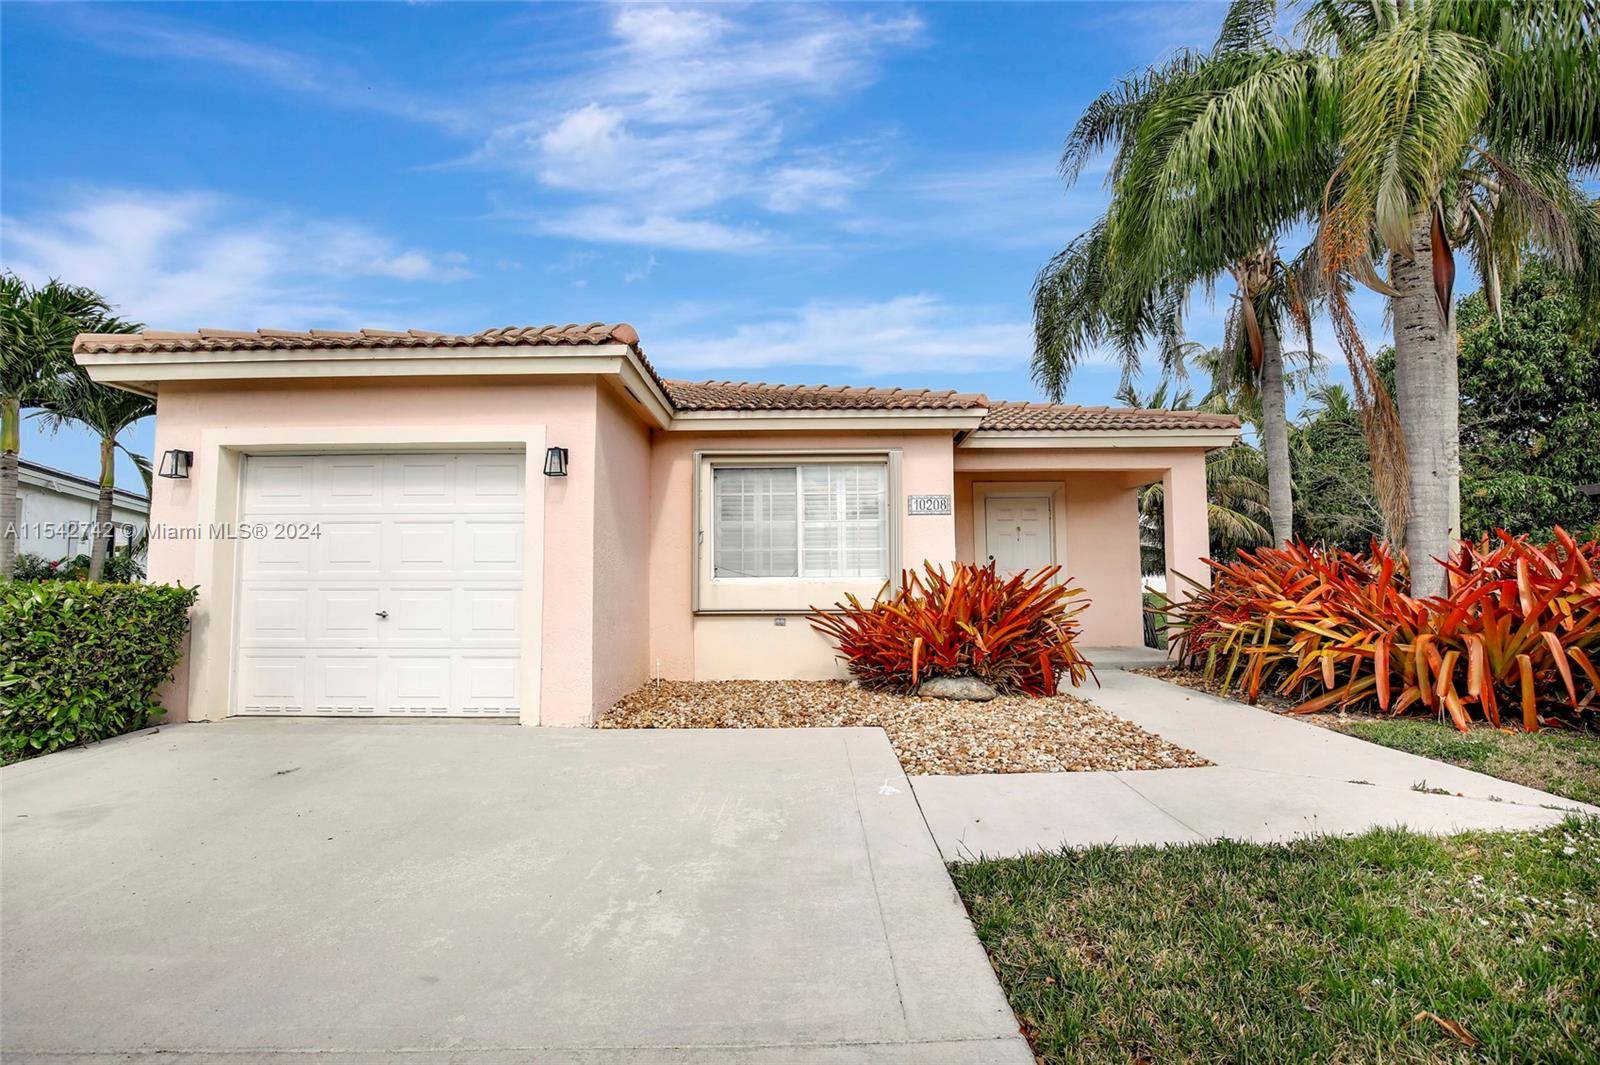 A true gem nestled in the desired gated community of Avalon in Miramar, positioned on a cul de sac lot with a gorgeous lake view seen upon entry.